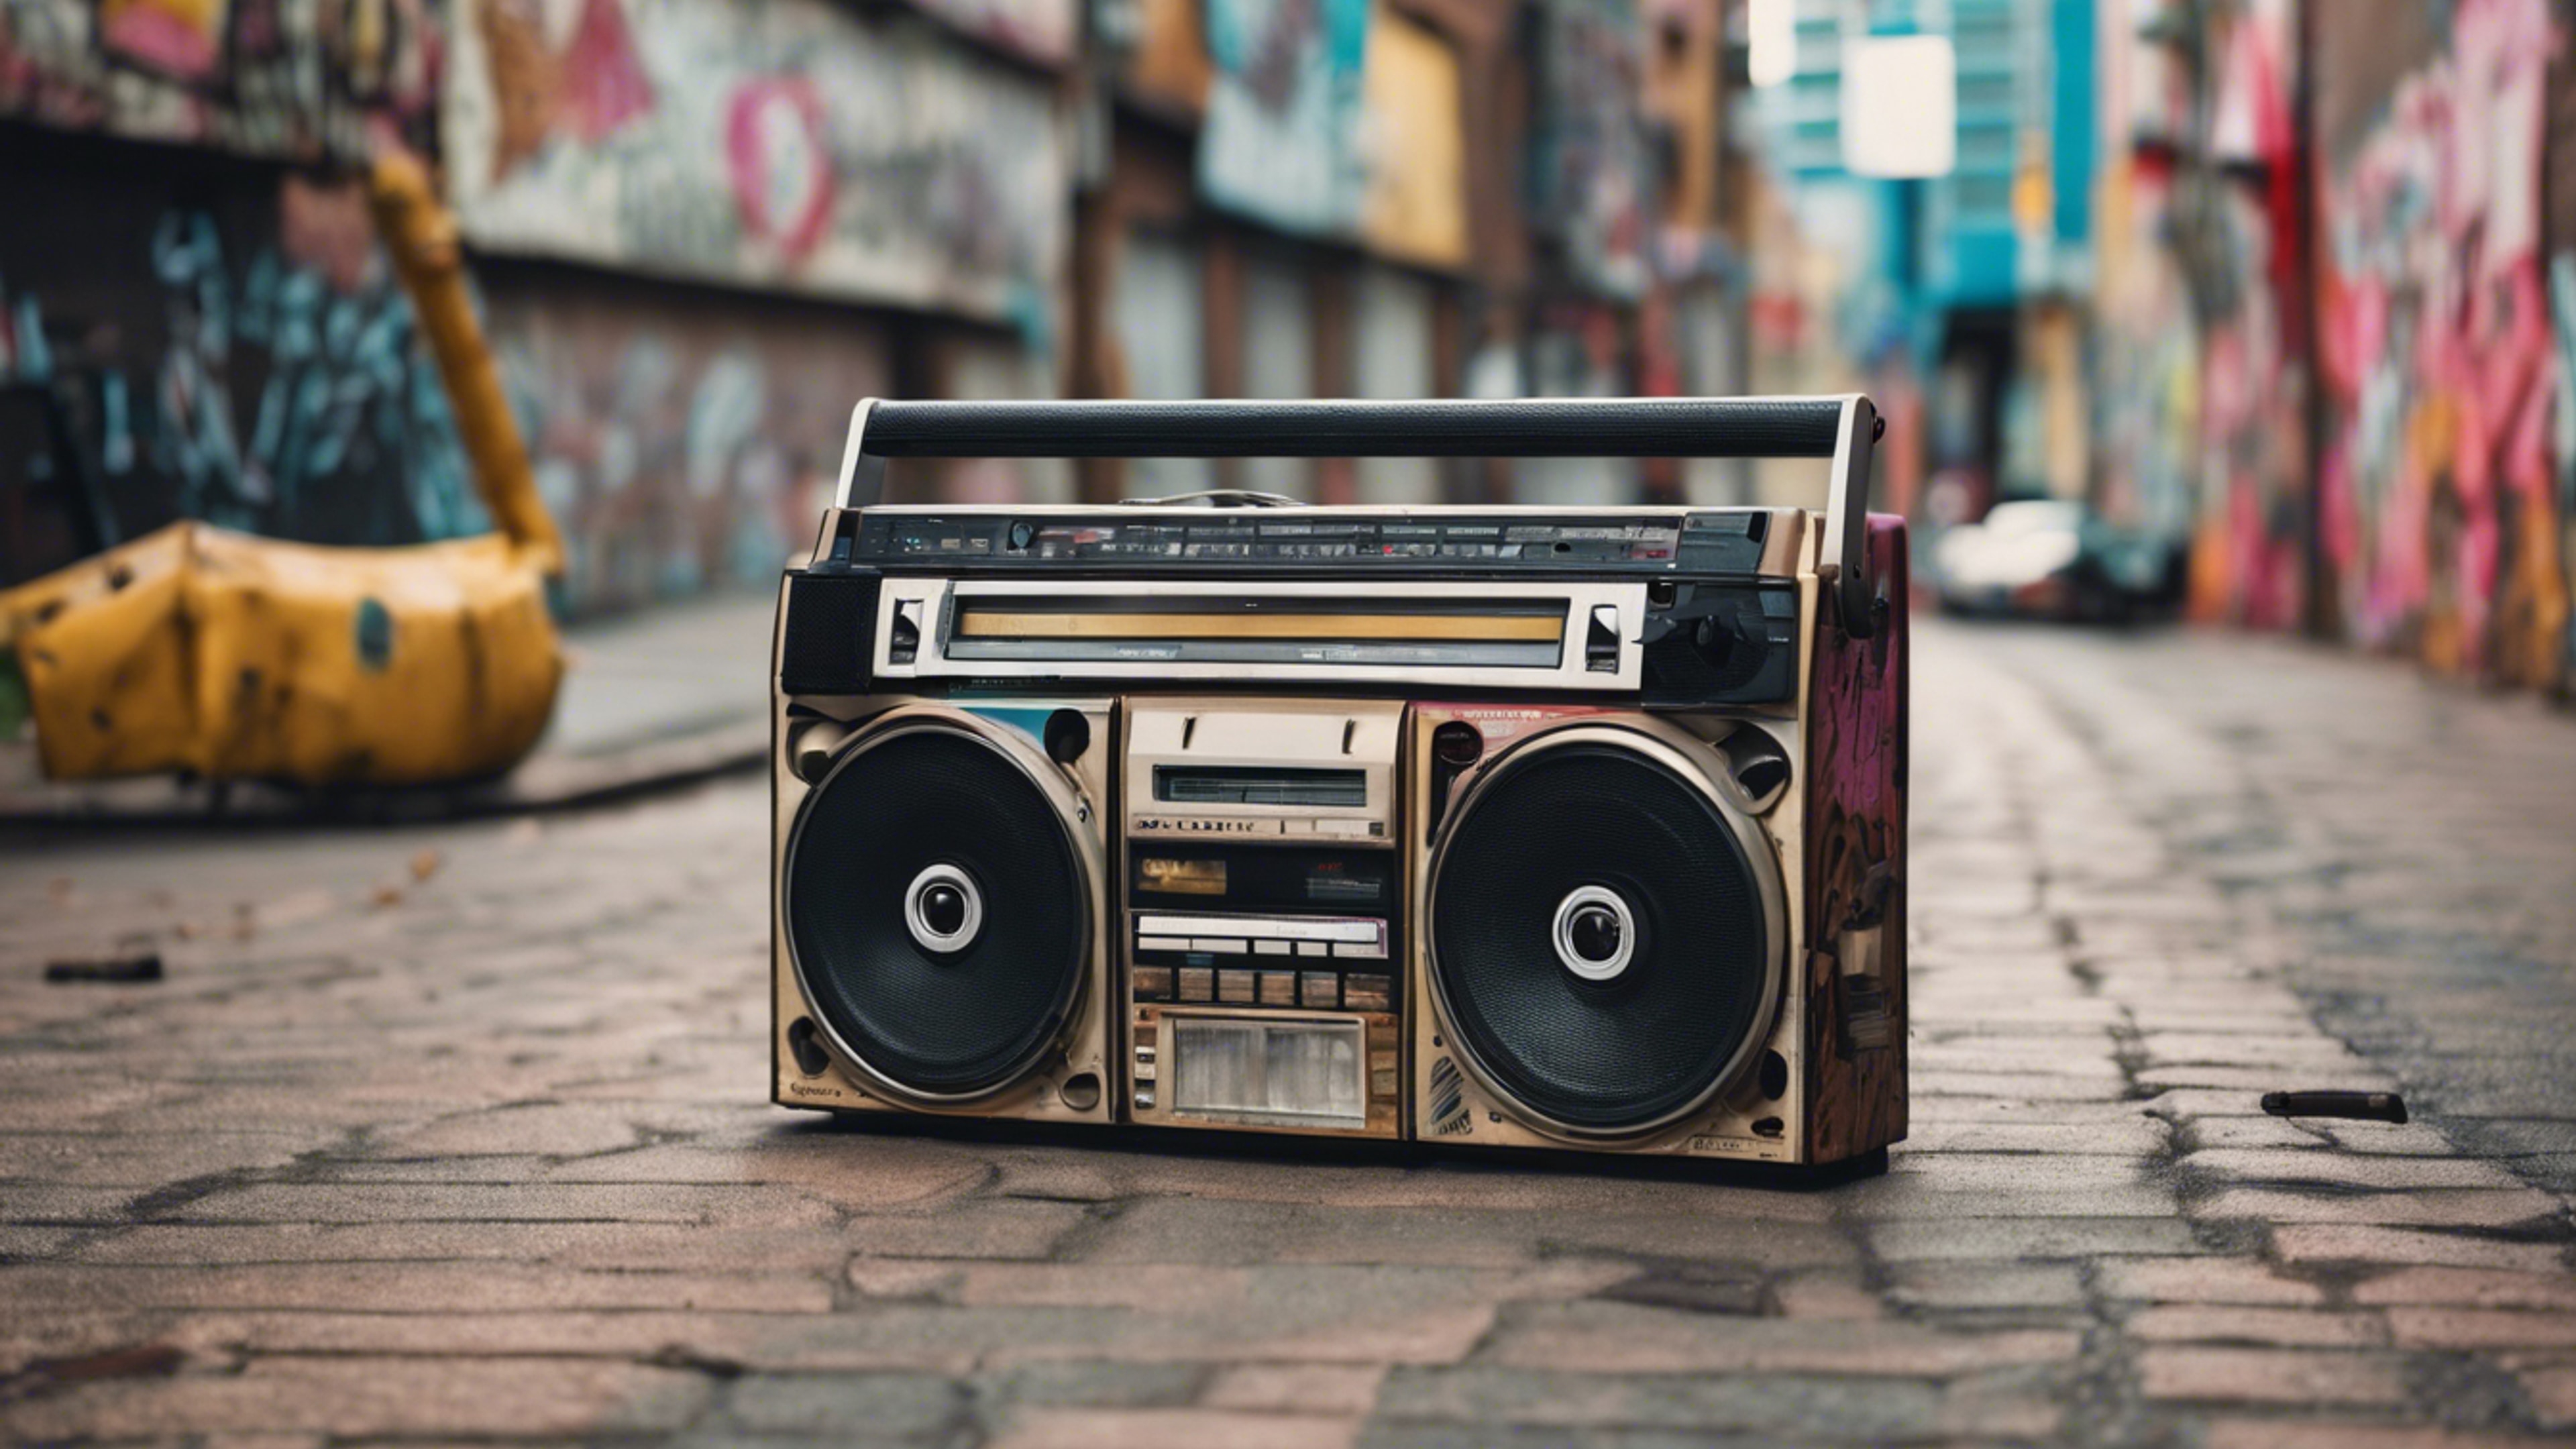 An old school 80s boombox playing cassette tapes on a graffitied street. Tapéta[63e13512f9e44708b5c0]